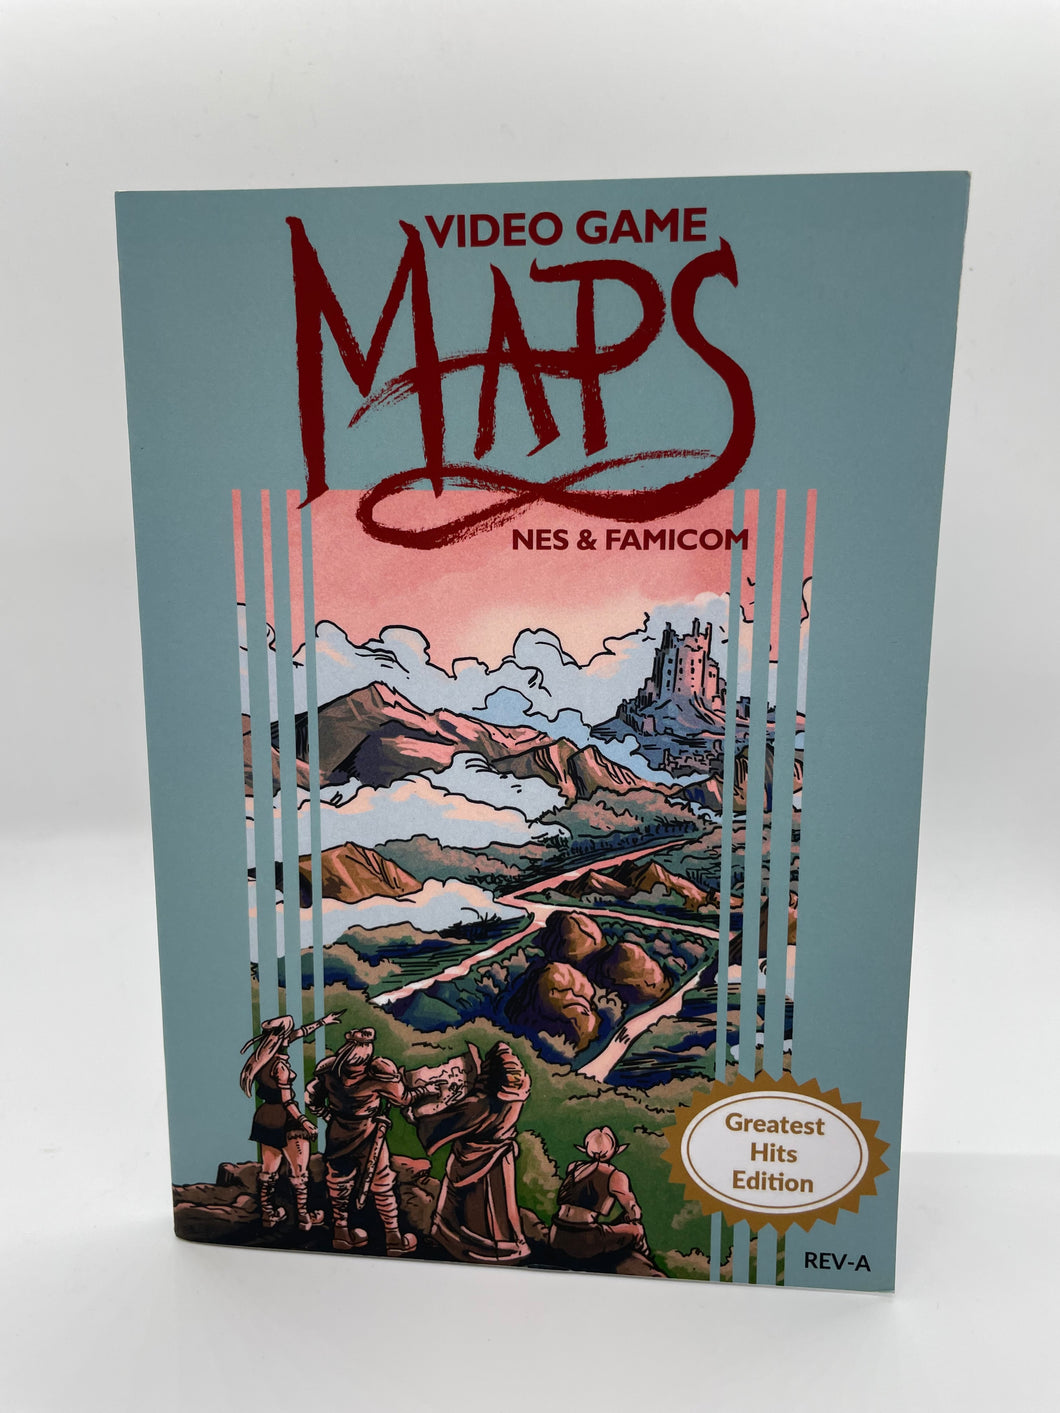 Video Game Maps: NES & Famicom — Greatest Hits Edition